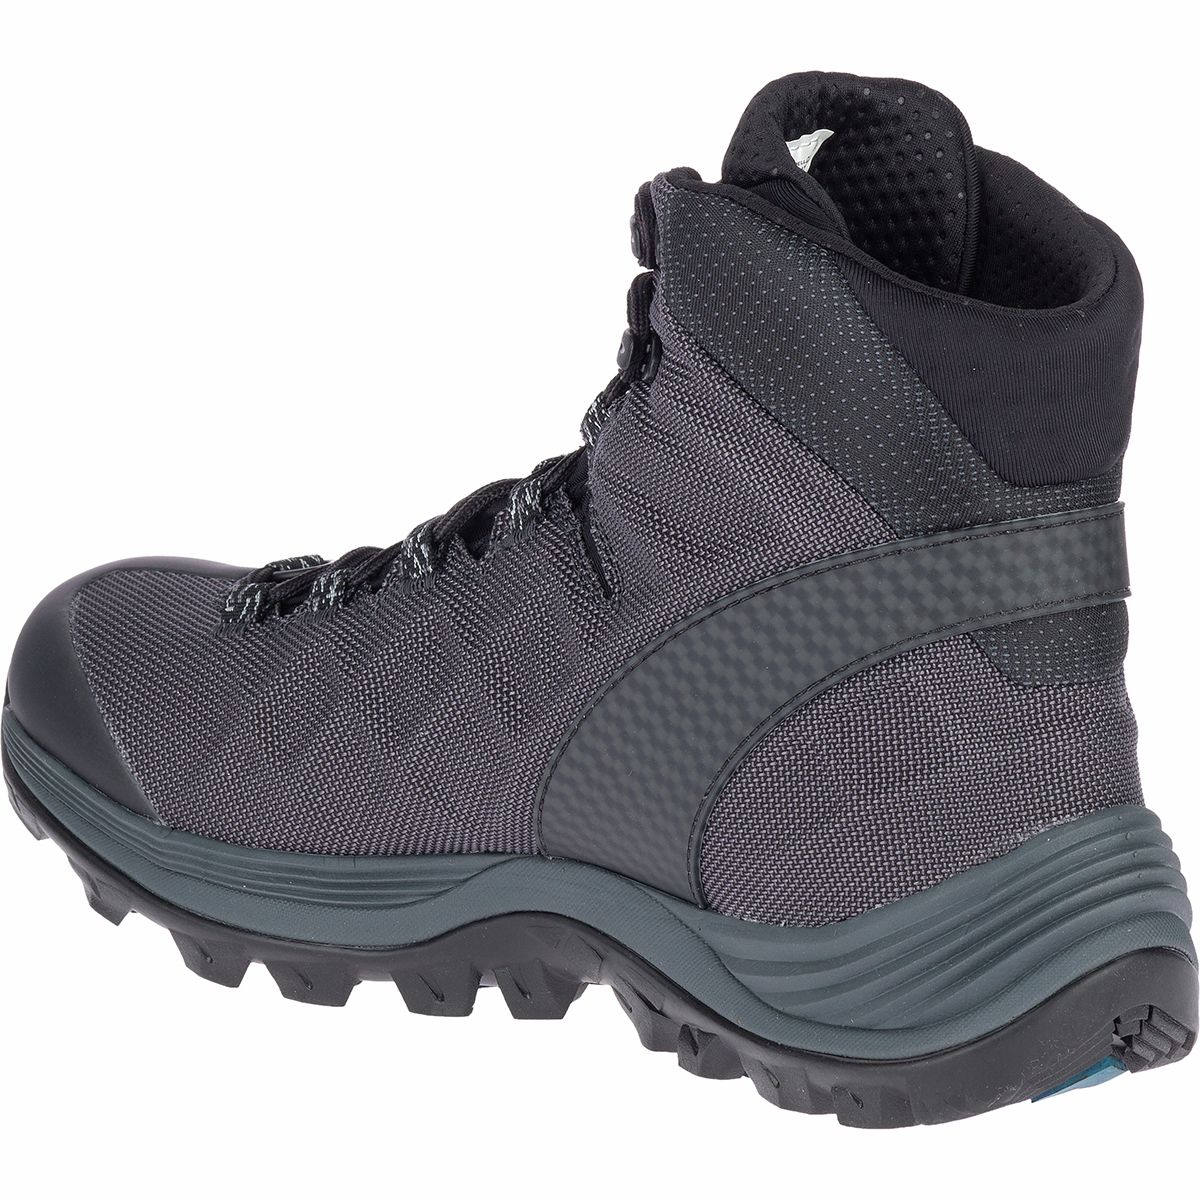 Merrell Thermo Rogue Mid GTX Hiking Boot - Men's - Footwear